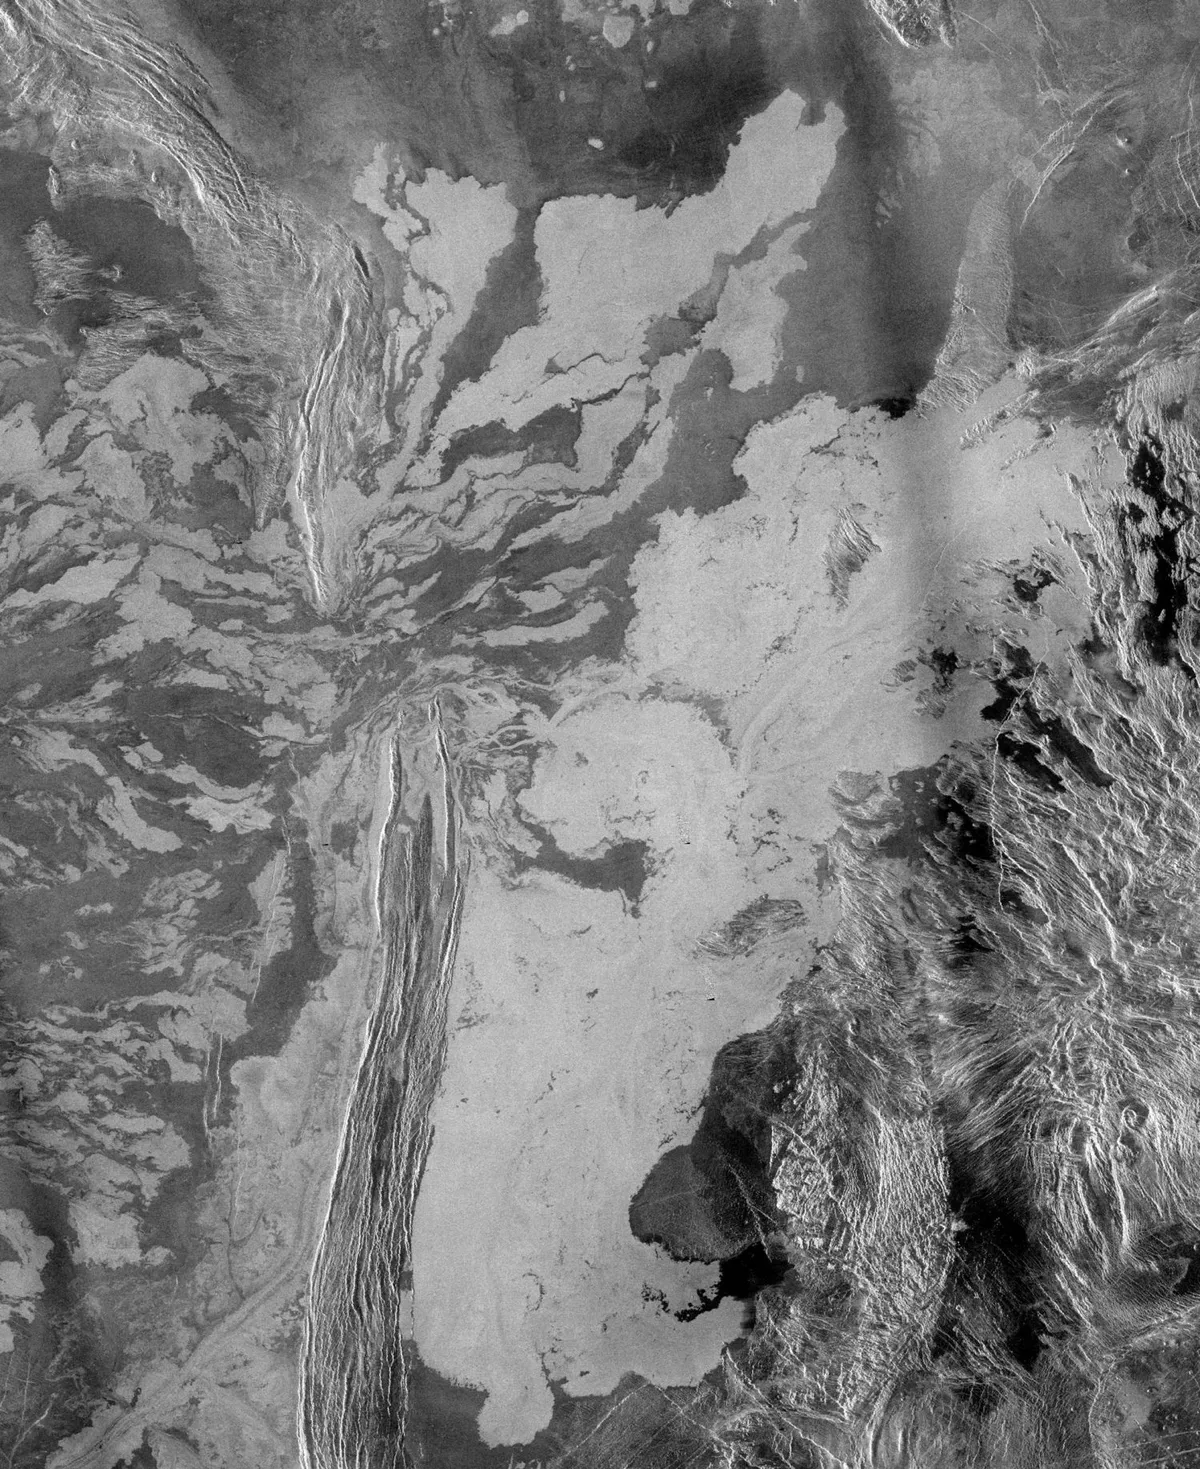 A system of dark lava flows on the surface of Venus, captured in an image by the Magellan spacecraft. Credit: NASA/JPL